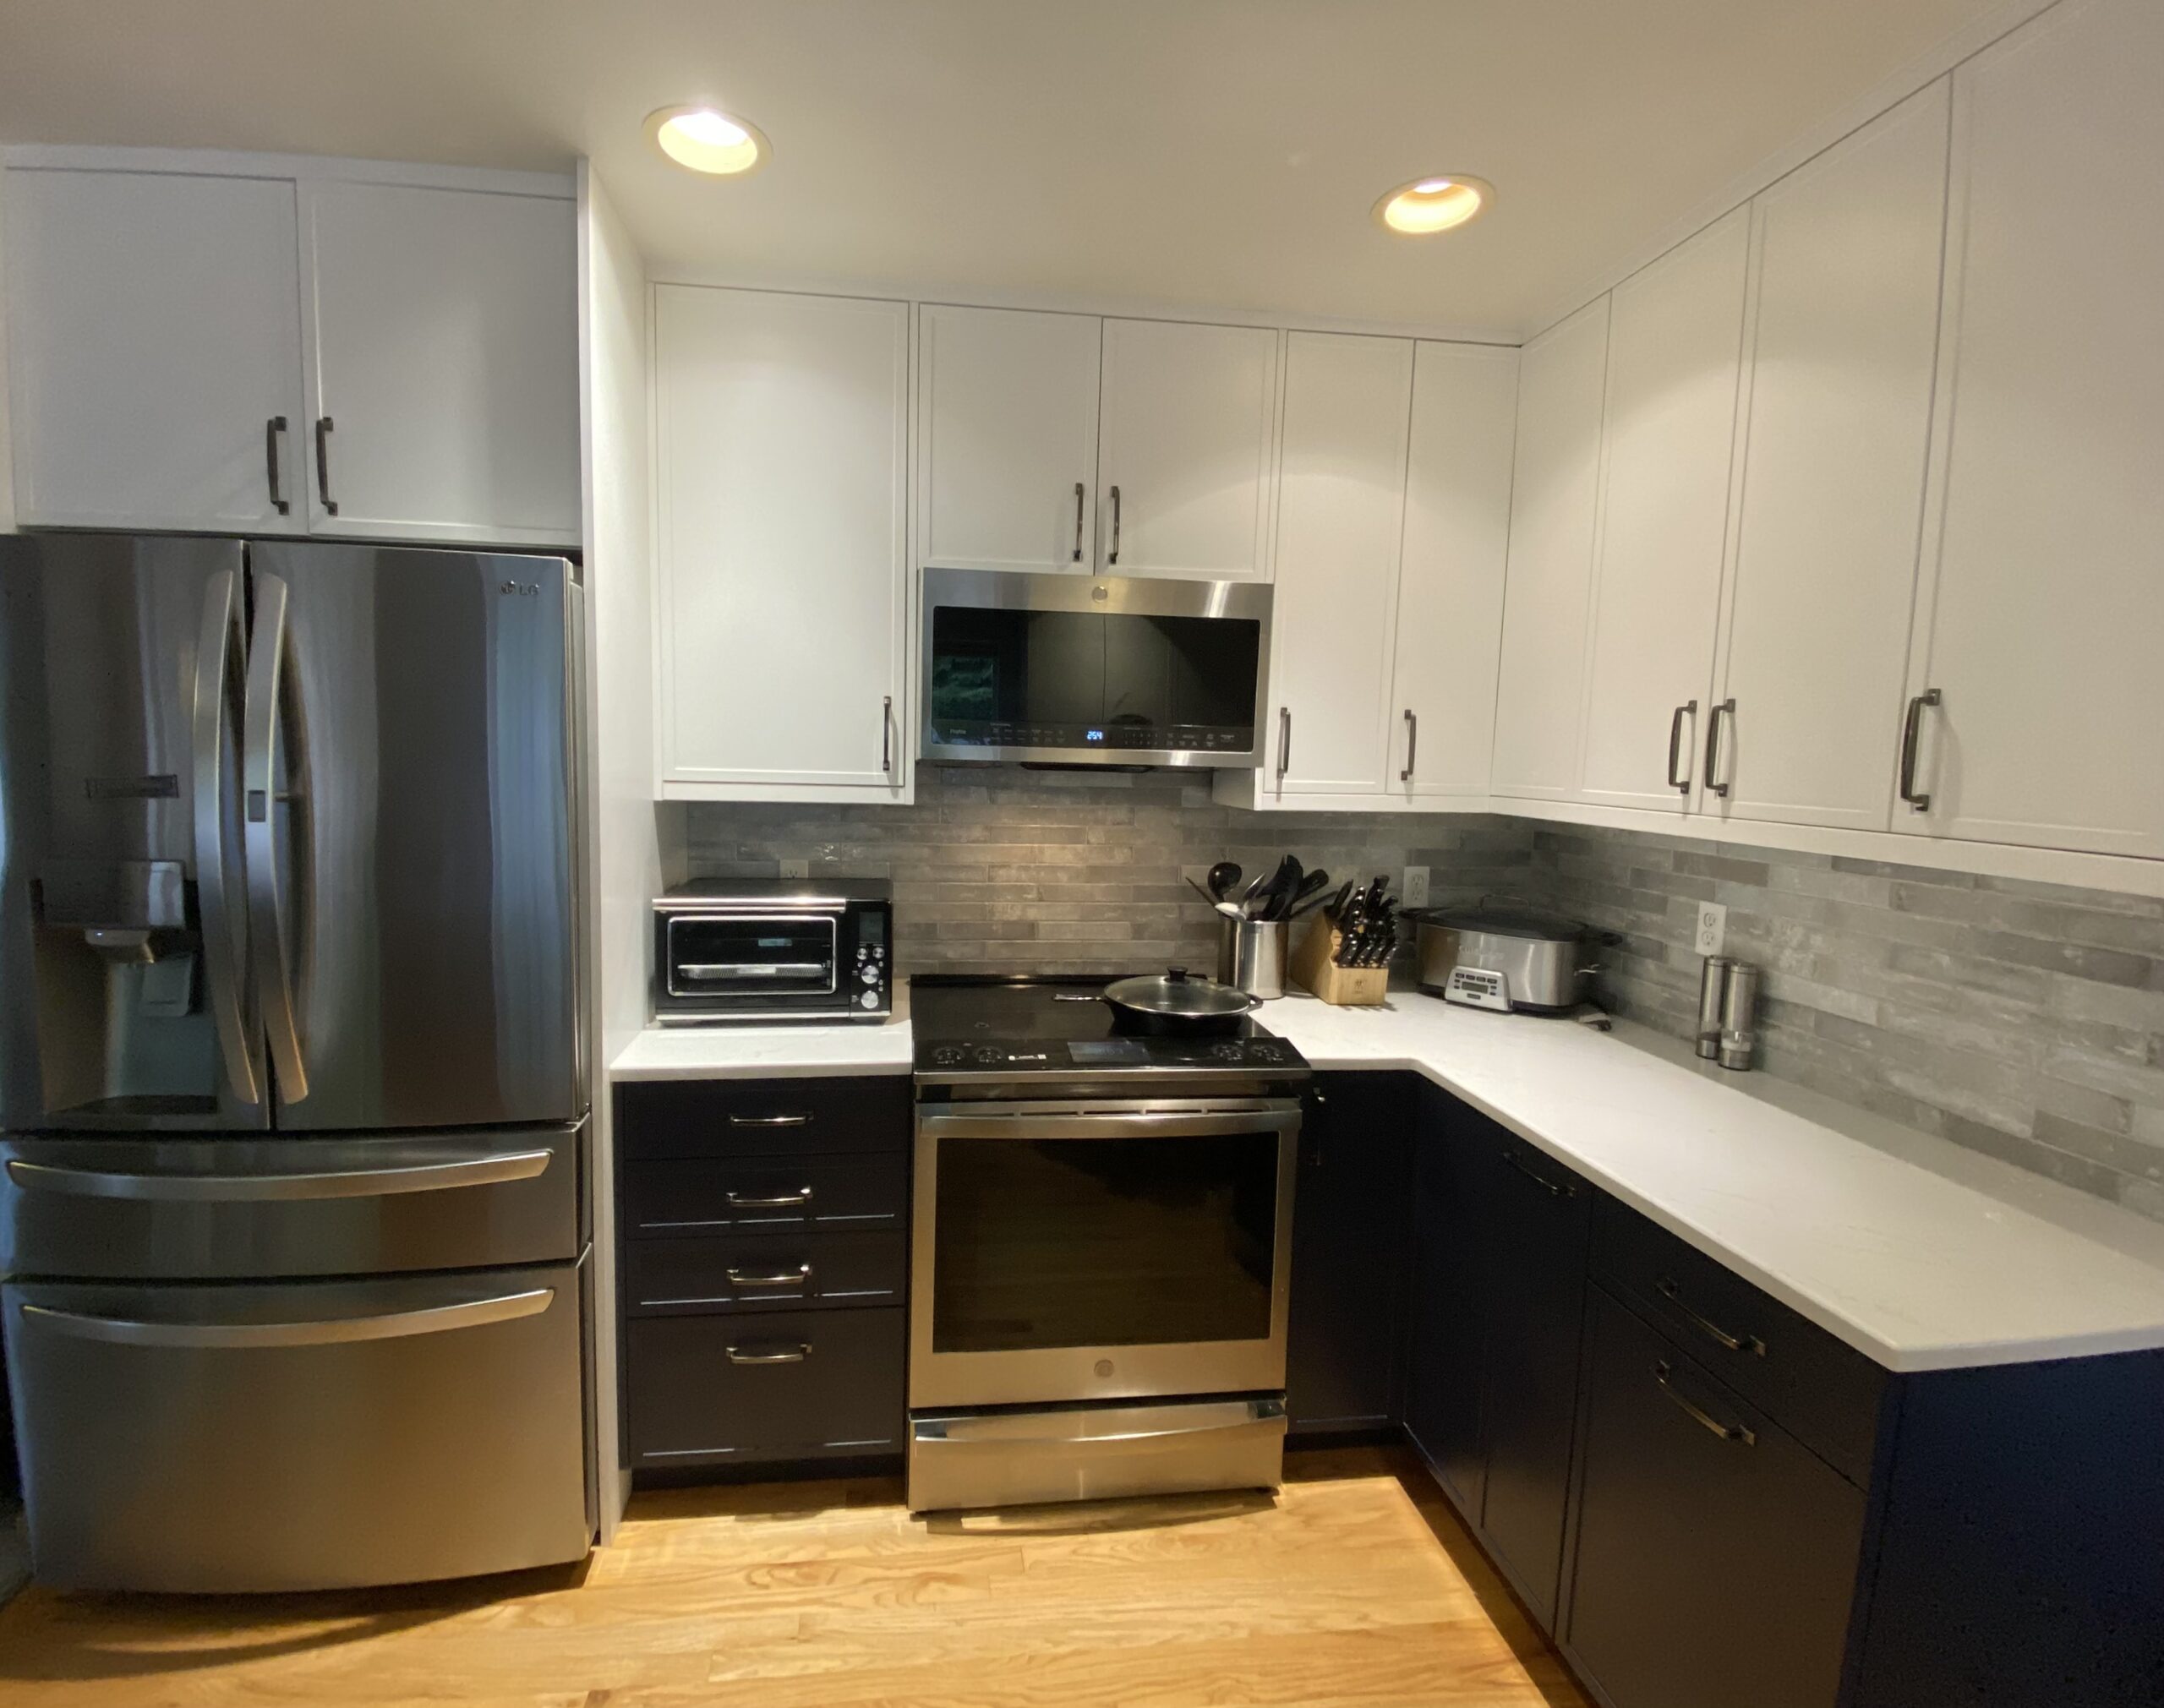 Slaughterbeck Kitchen, Pantry, and Laundry Room Remodel project